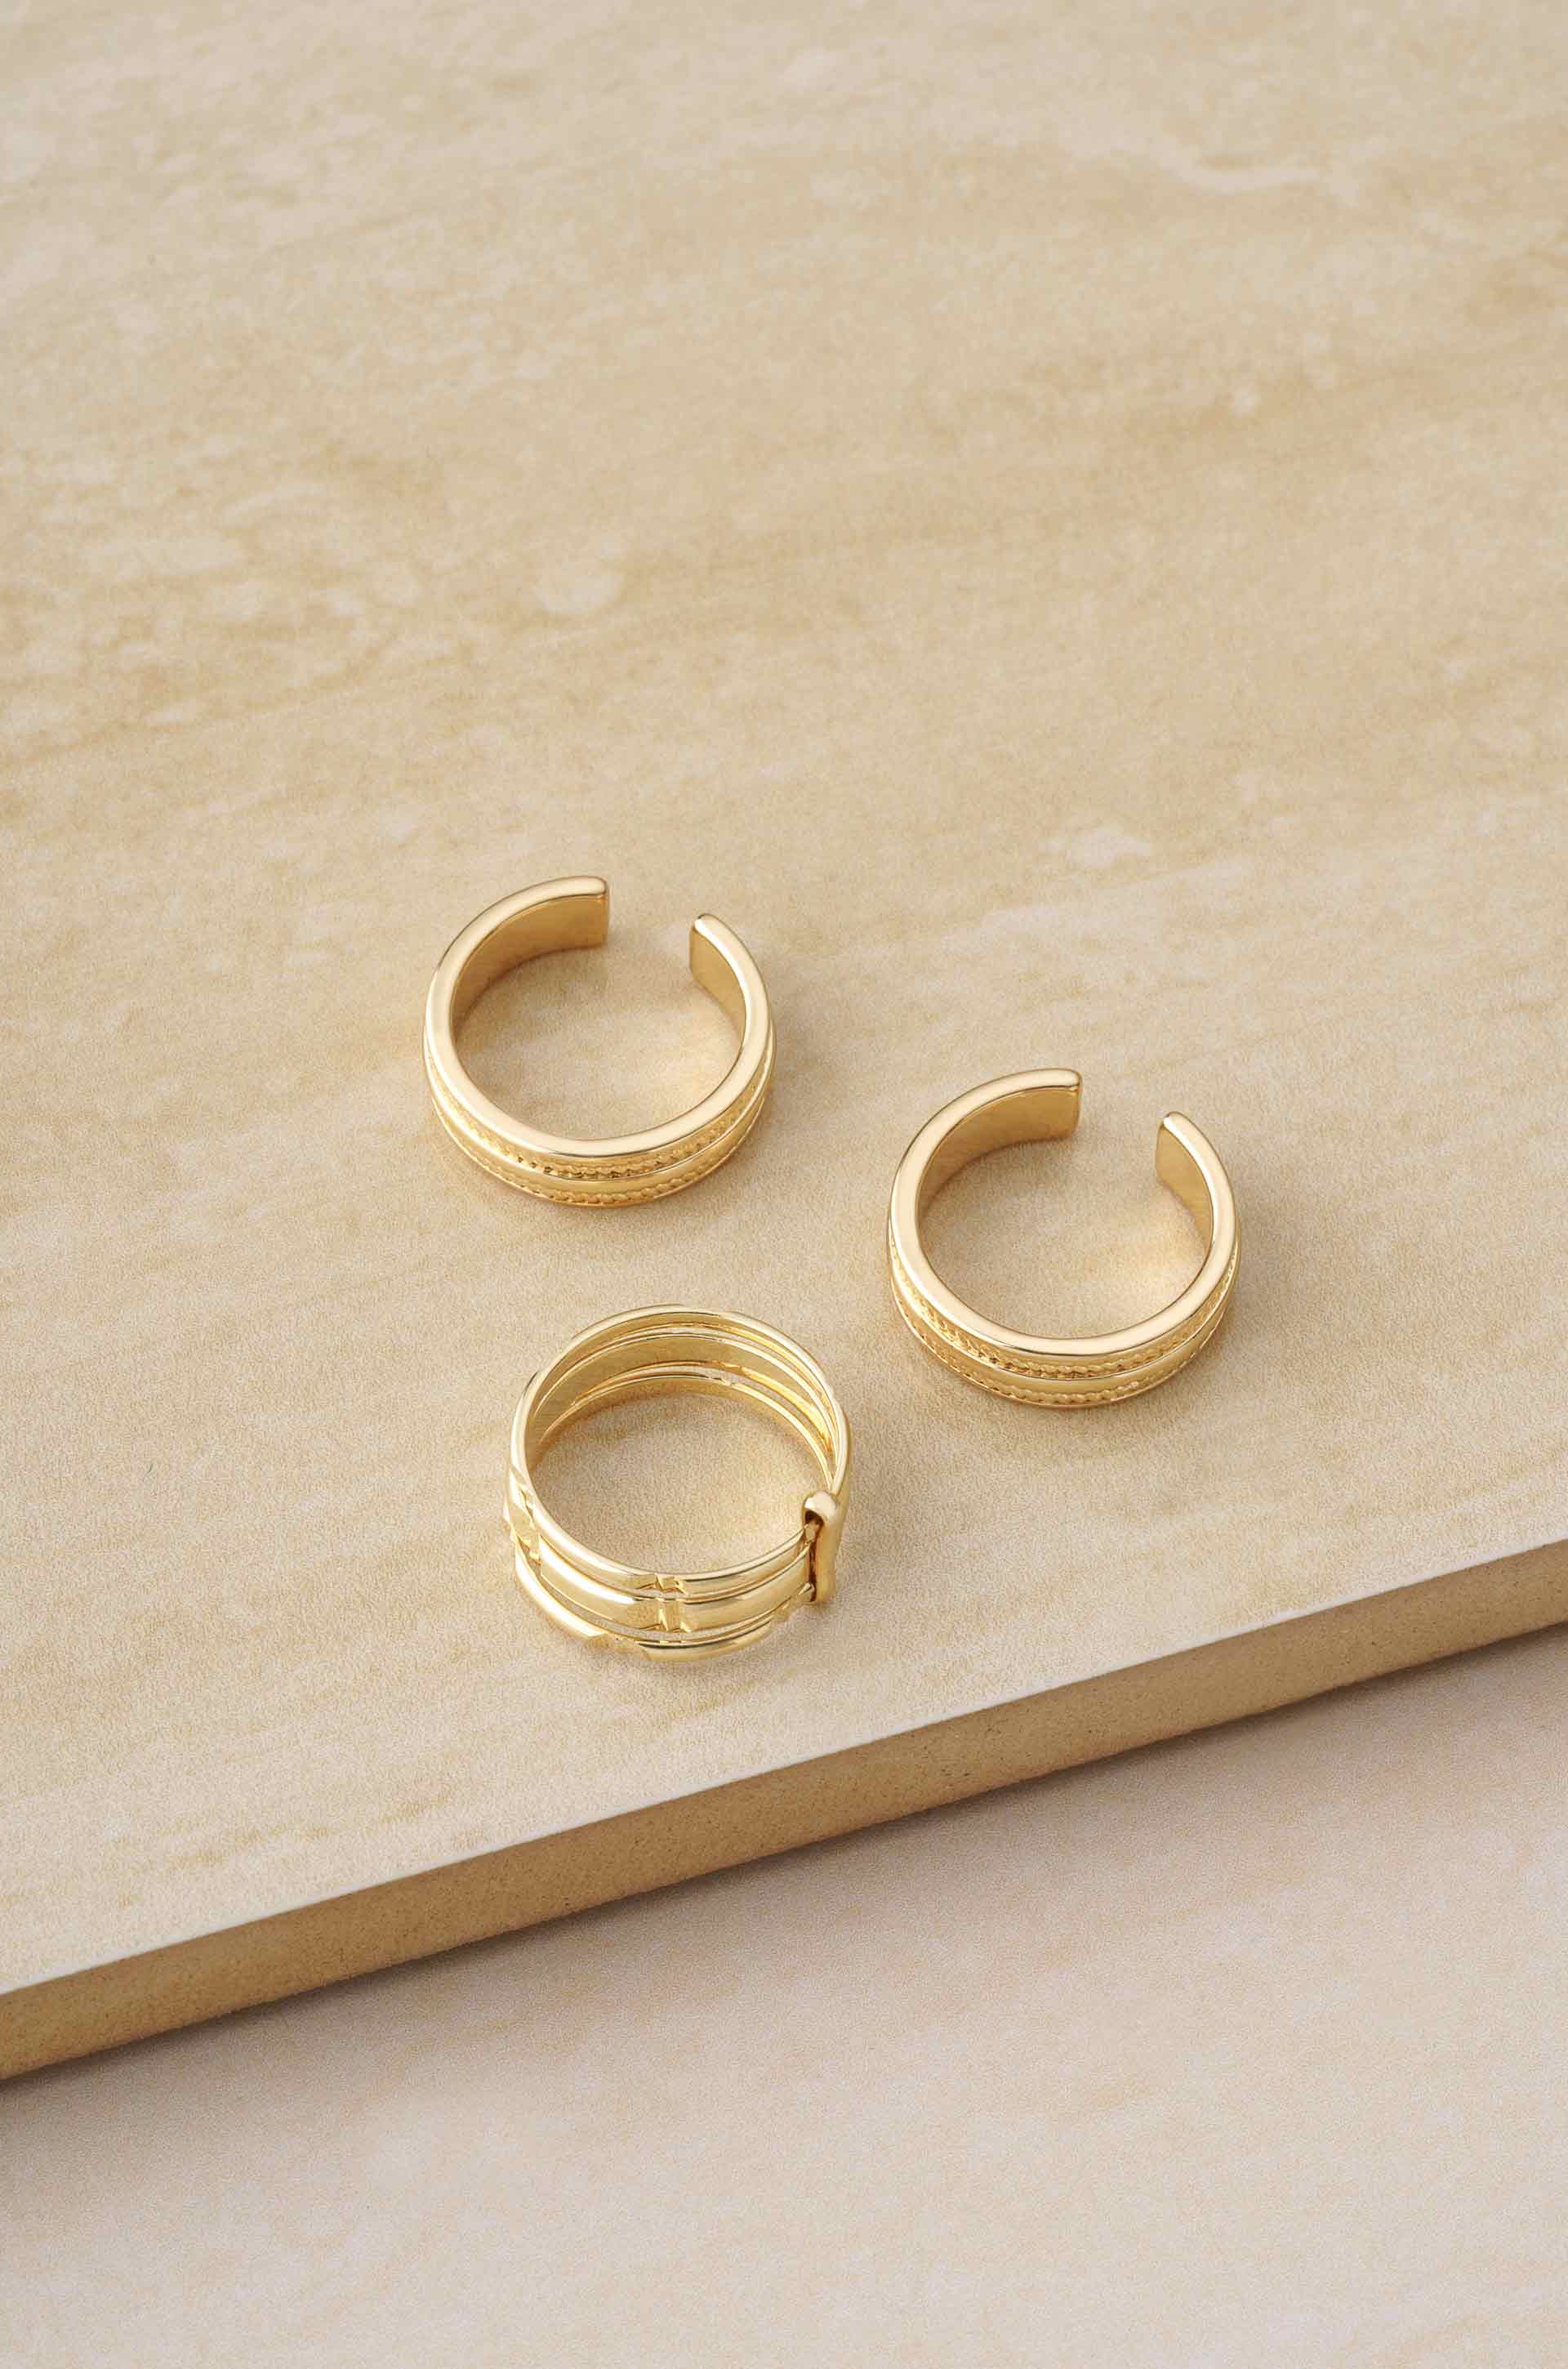 Easy Golden Stackers 18k Gold Plated Ring Set on slate background